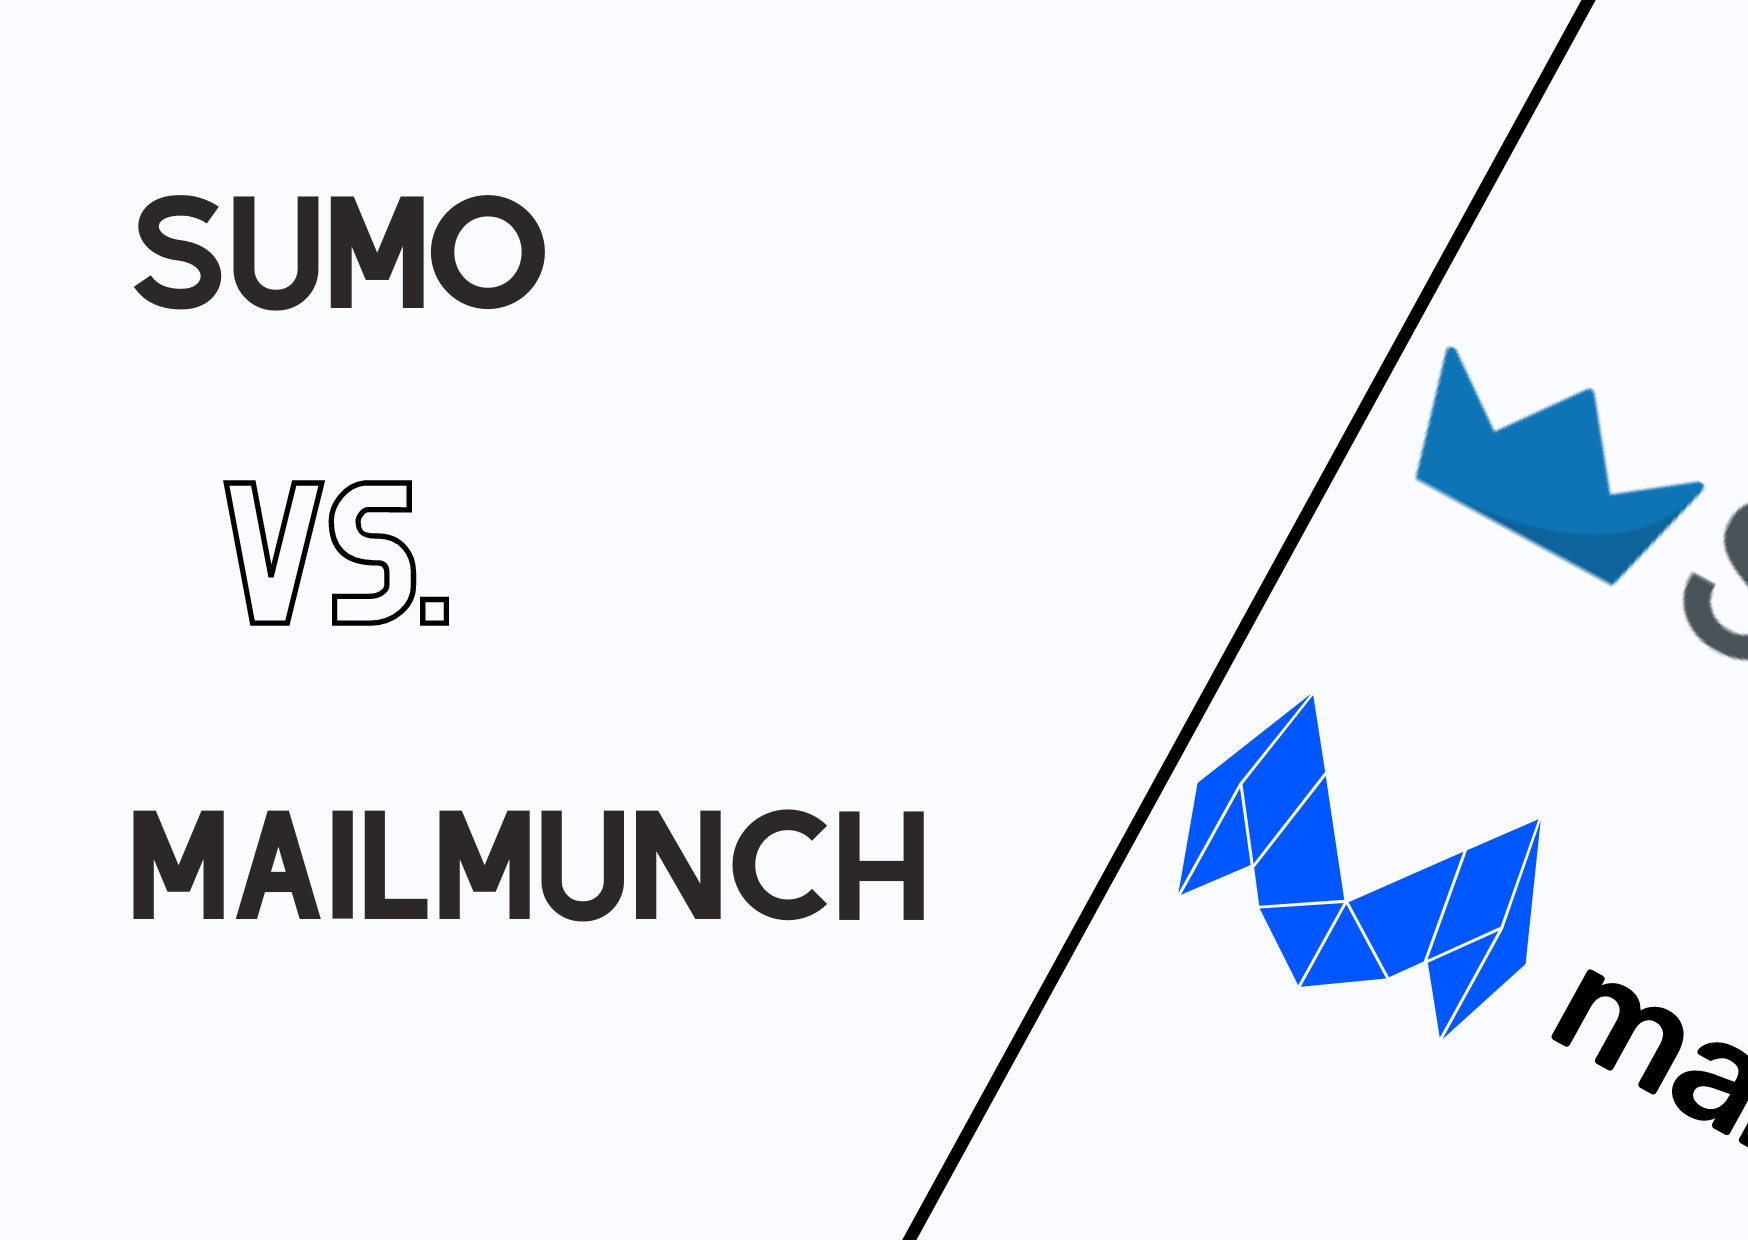 the banner of Sumo and Mailmunch with their logos to compare and contrast the two tools